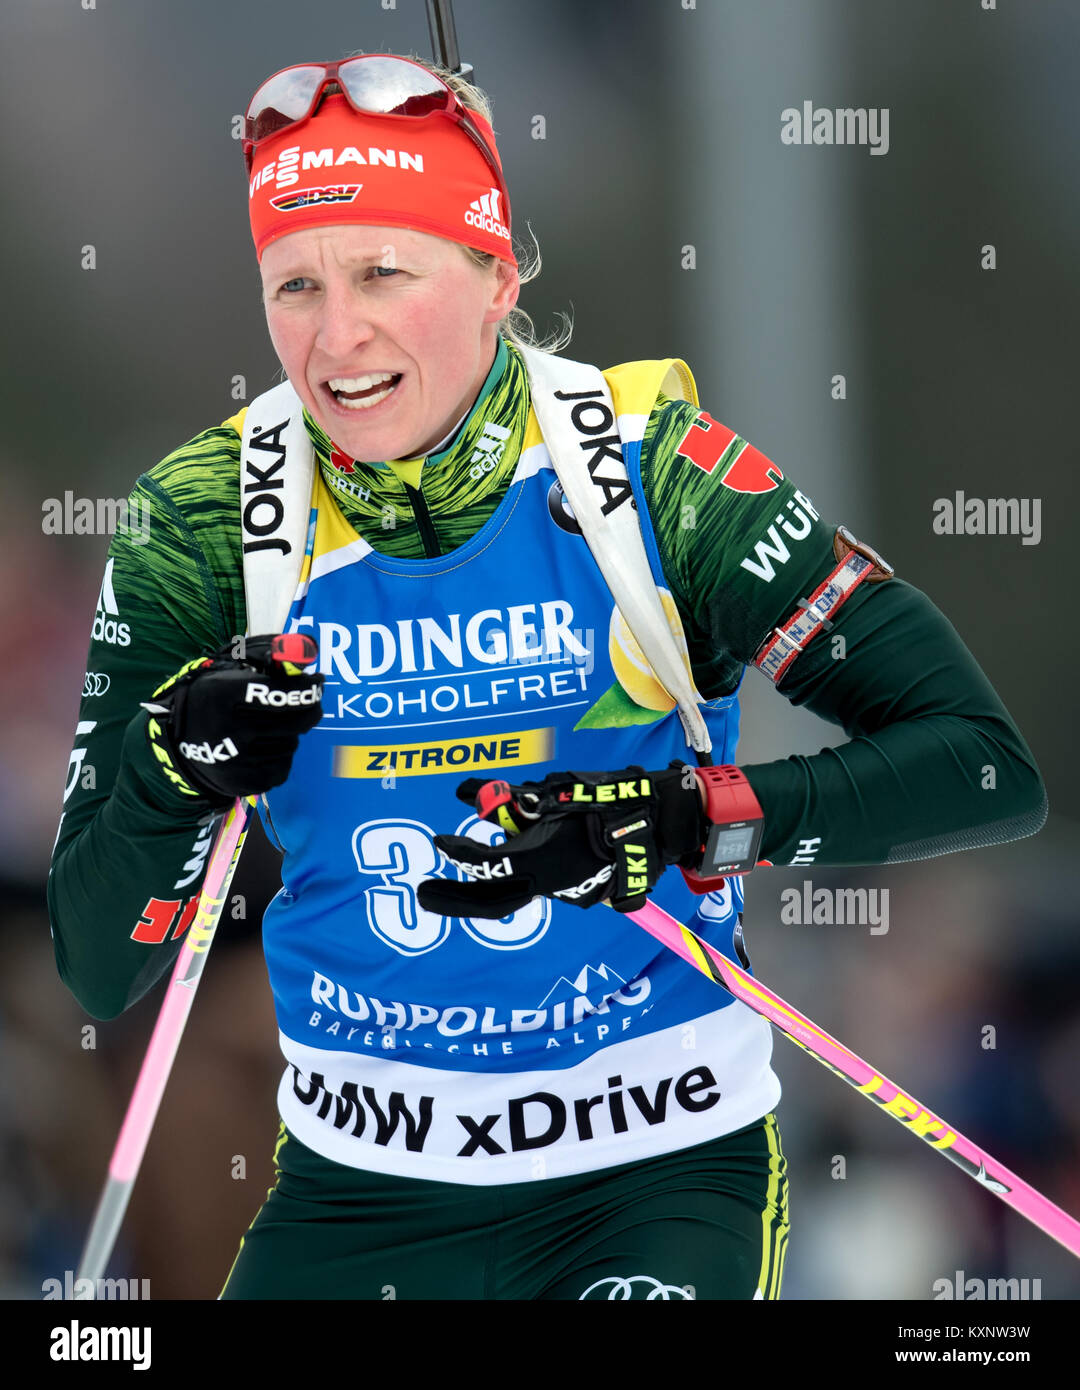 Ruhpolding, Germany. 11th Jan, 2018. Biathlete Franziska Hildebrand from Germany jumps back into the race at Chiemgau Arena in Ruhpolding, Germany, 11 January 2018. Credit: Sven Hoppe/dpa/Alamy Live News Stock Photo